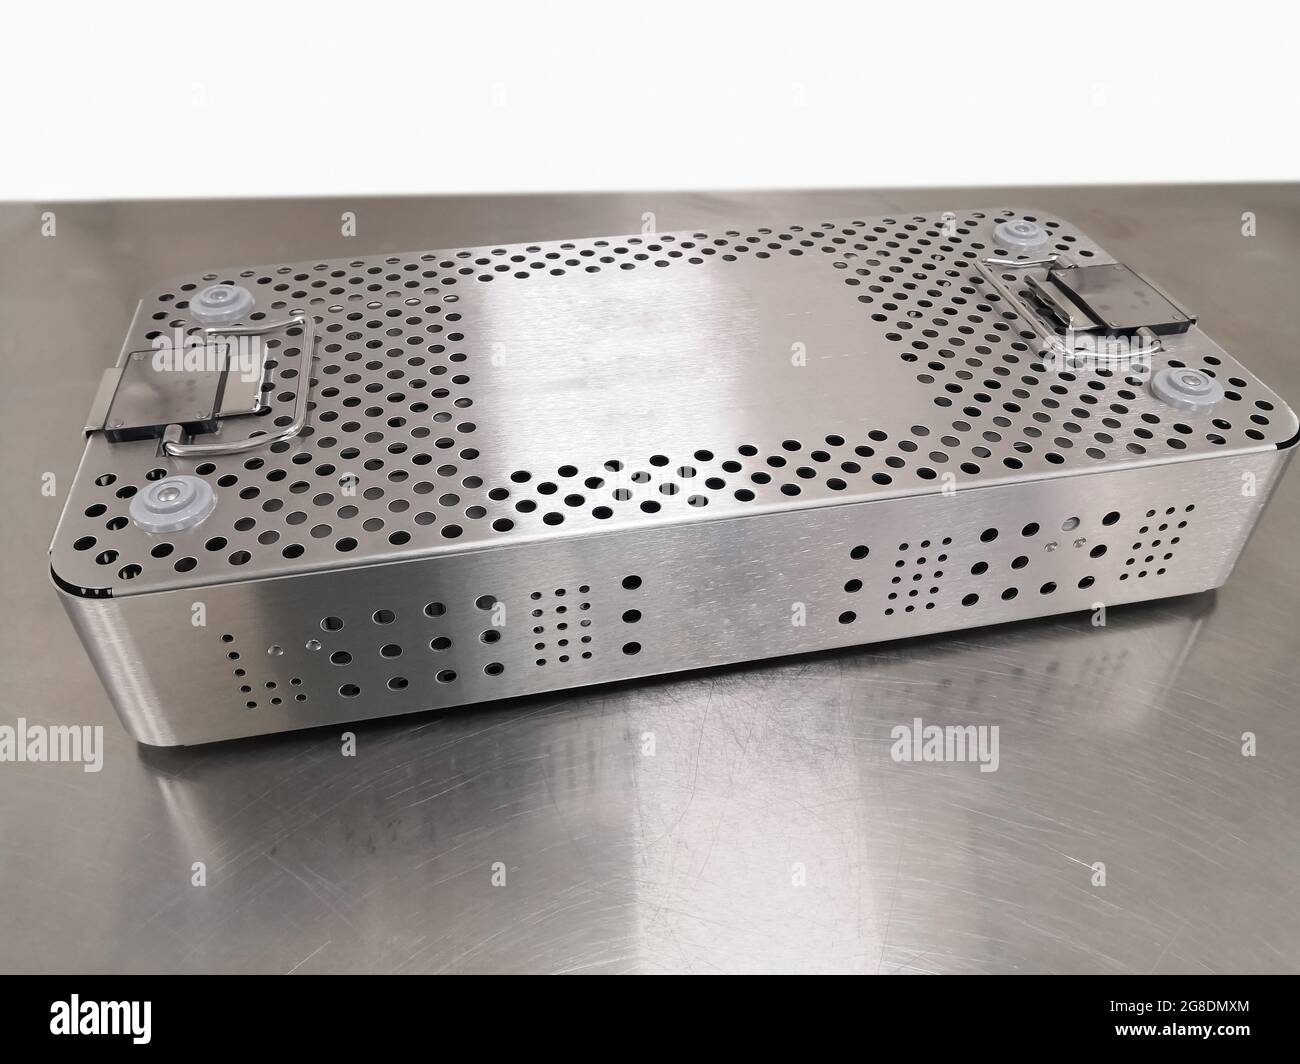 Closeup Image Of Steel Sterilization Tray. Using For Pack And Sterilize Surgical Instrument. Selective Focus Stock Photo